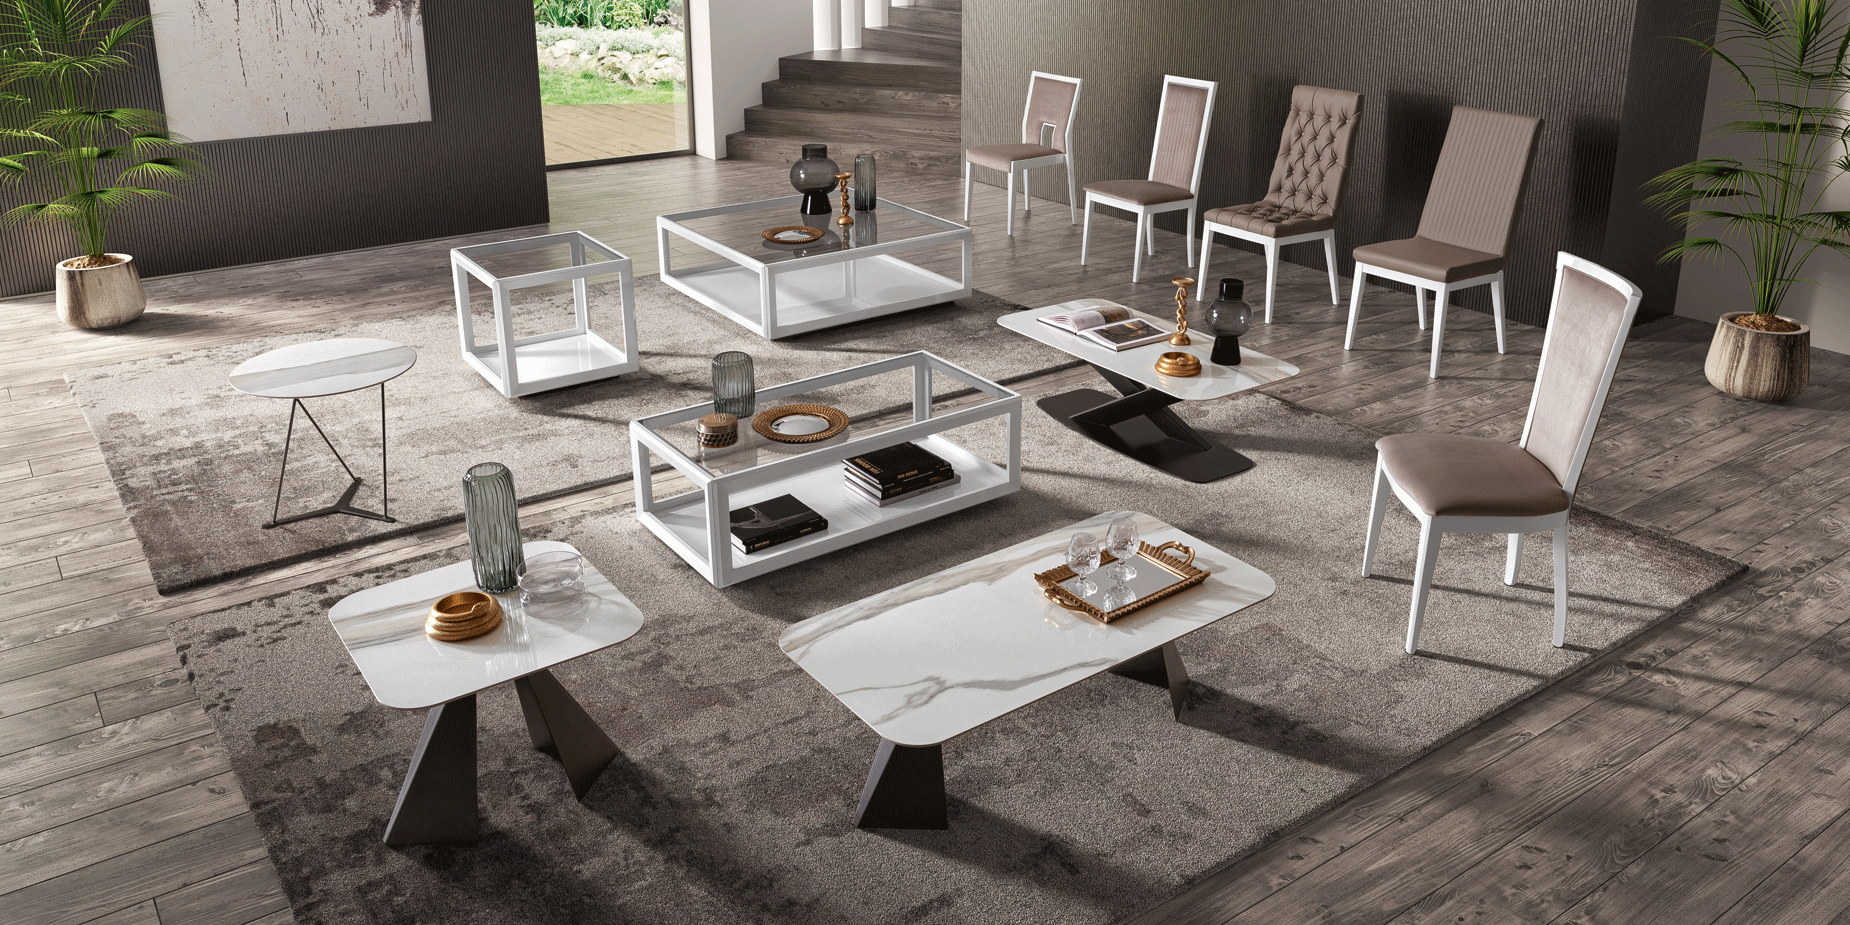 Brands Garcia Sabate REPLAY Elite WHITE Dining room Additional items